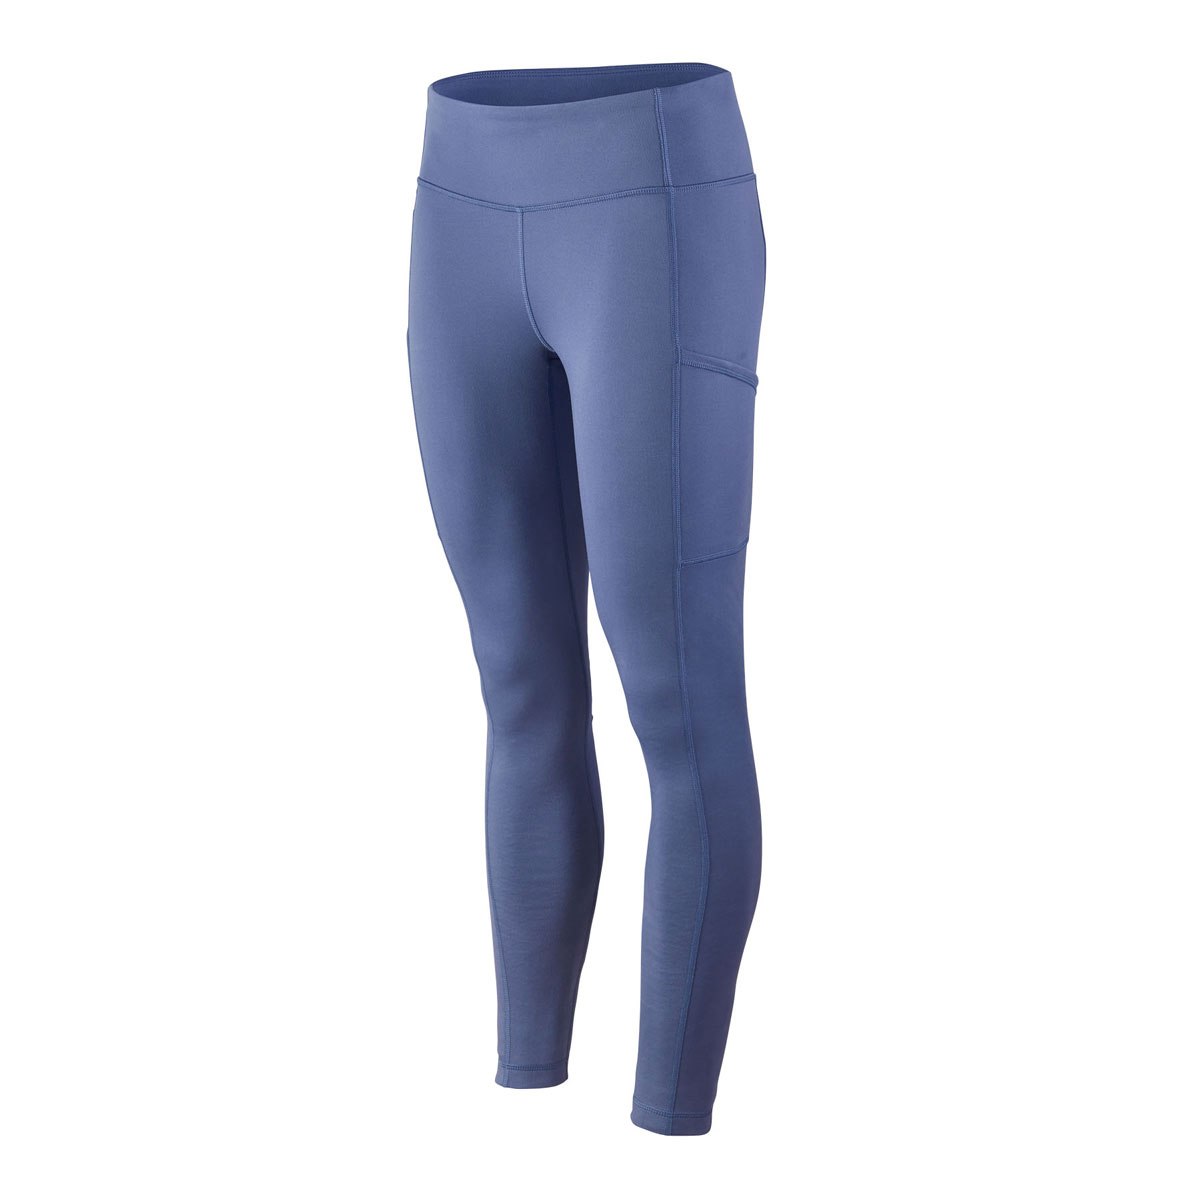 https://p7014794.vo.llnwd.net/e1/media/catalog/product/cache/0d20016c3cc1e67d02d0cc11108fe39c/p/a/patagonia-womens-pack-out-tights-current-blue.jpg